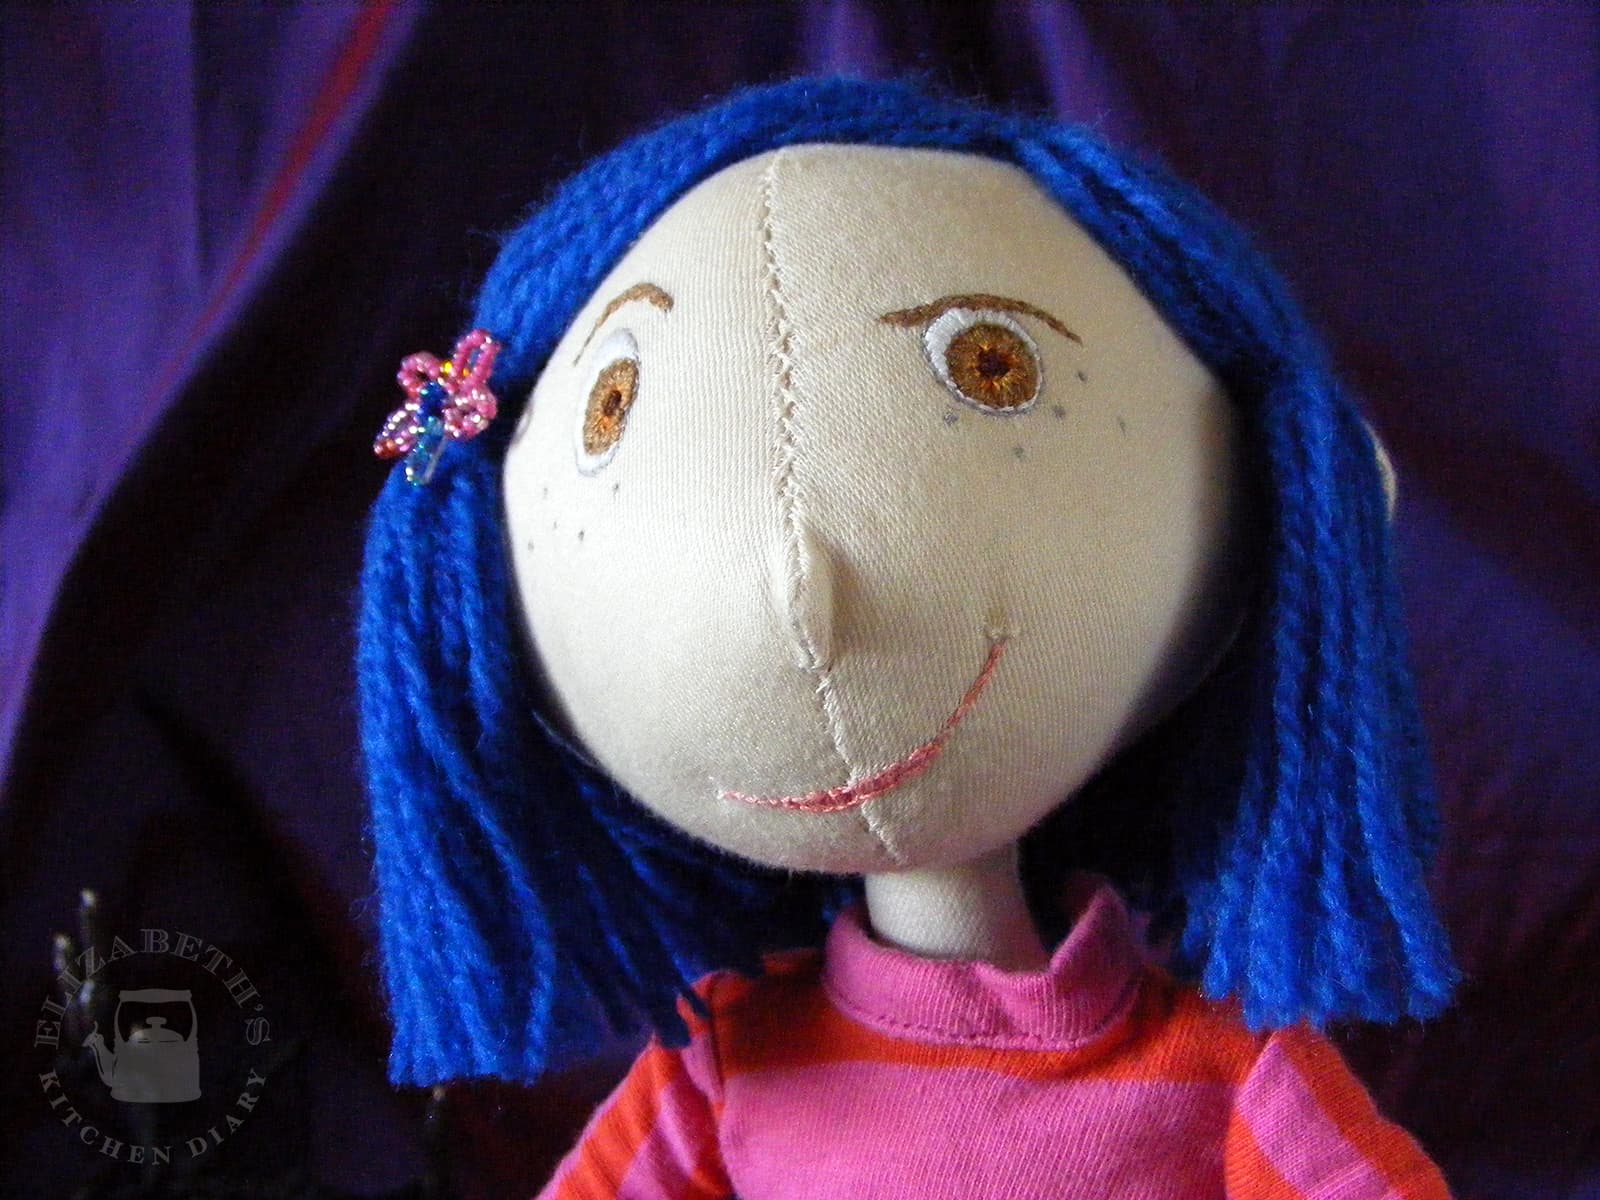 Close up image of the fabric Coraline with her embroidered face and little cheeky grin.